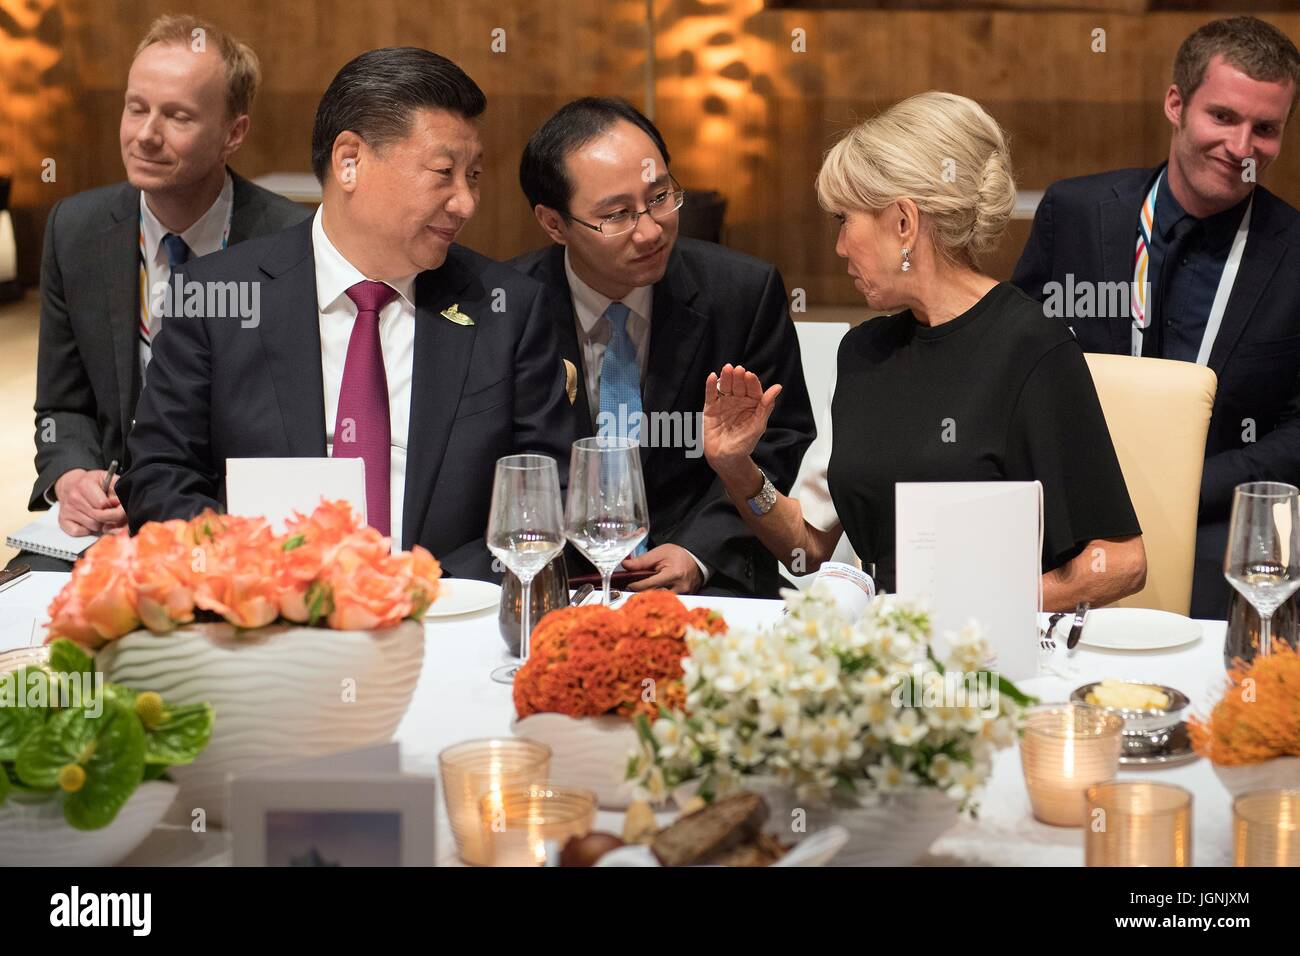 Brigitte Macron, wife of French President Emmanuel Macron, right, chats with Chinese President Xi Jinping during a dinner for world leaders attending the first day of the G20 Summit meeting at the Elbphilharmonie concert hall July 7, 2017 in Hamburg, Germany.   (Bundesregierung/Bergmann via Planetpix) Stock Photo